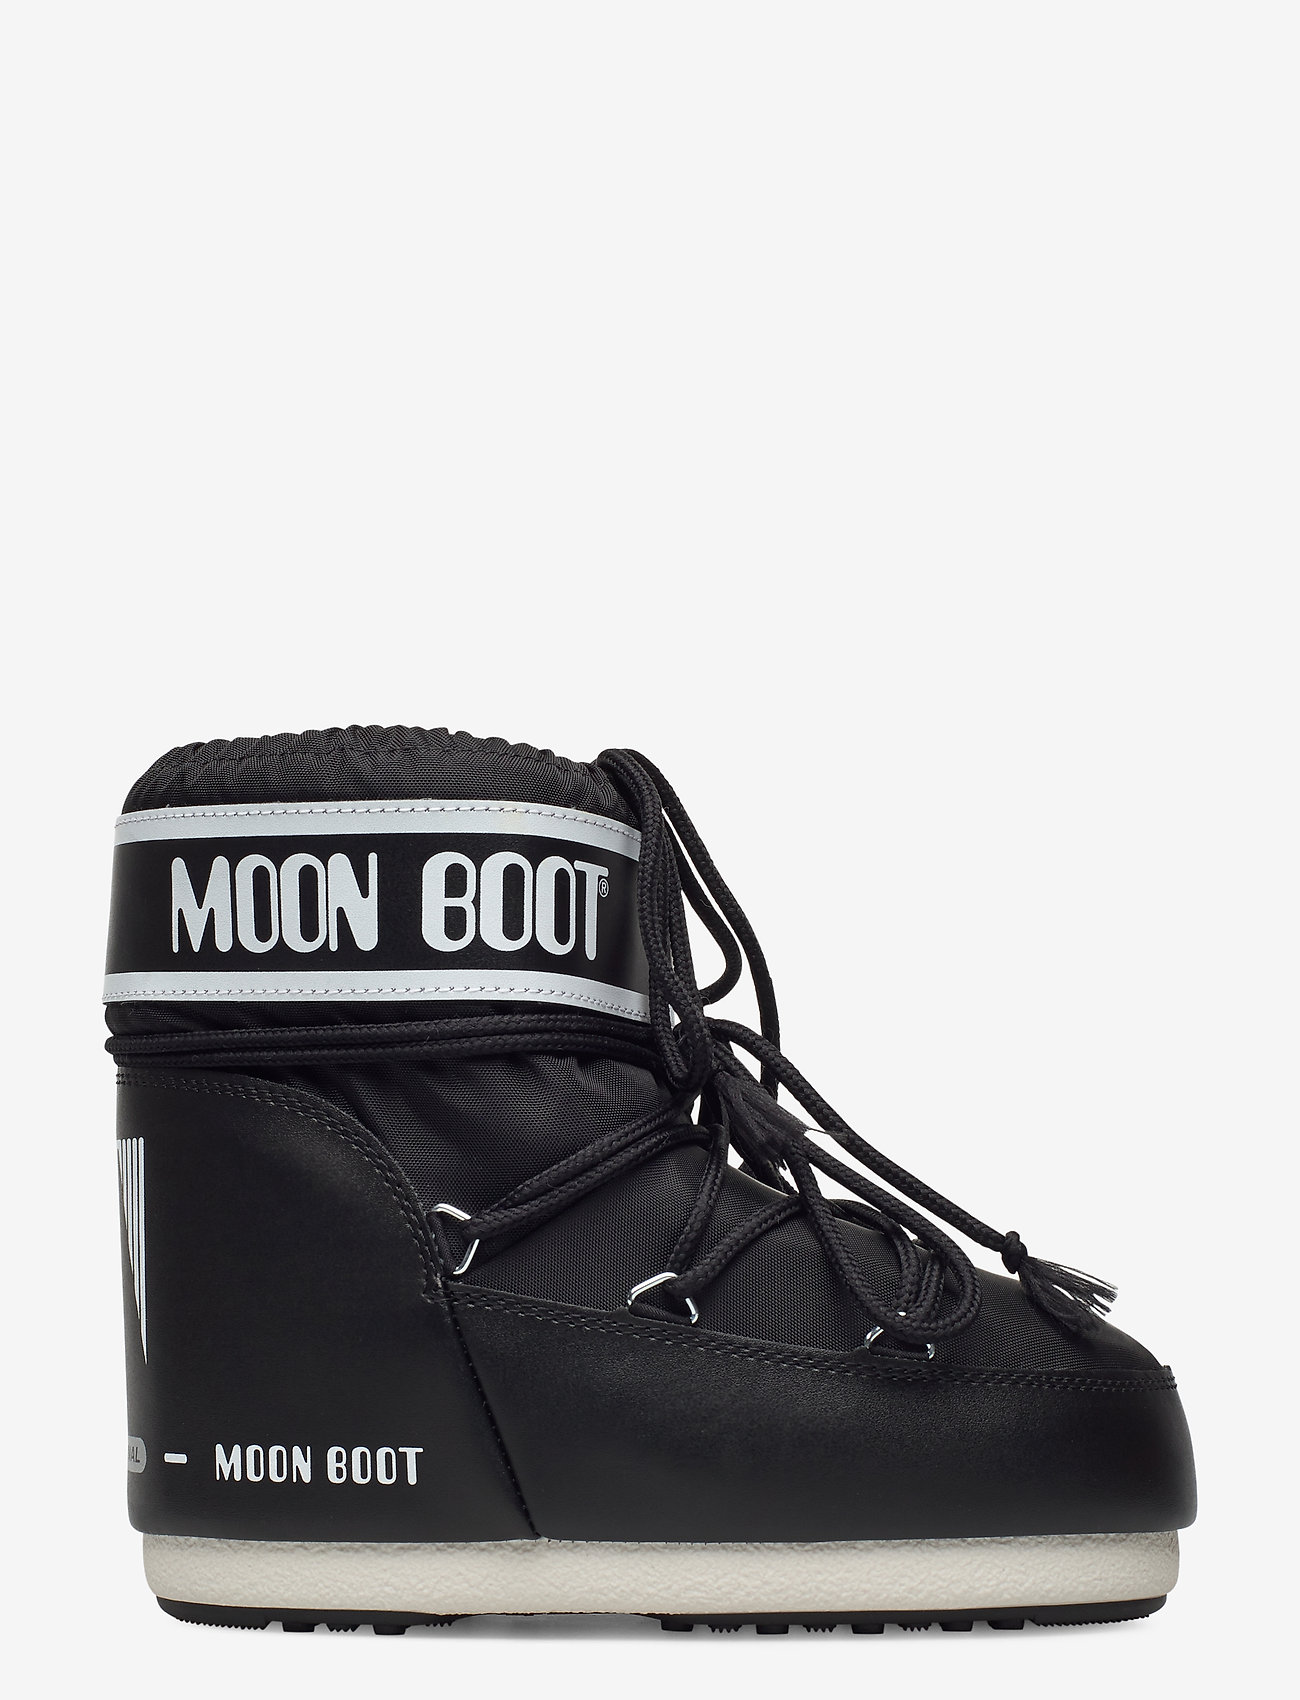 moon boot classic low